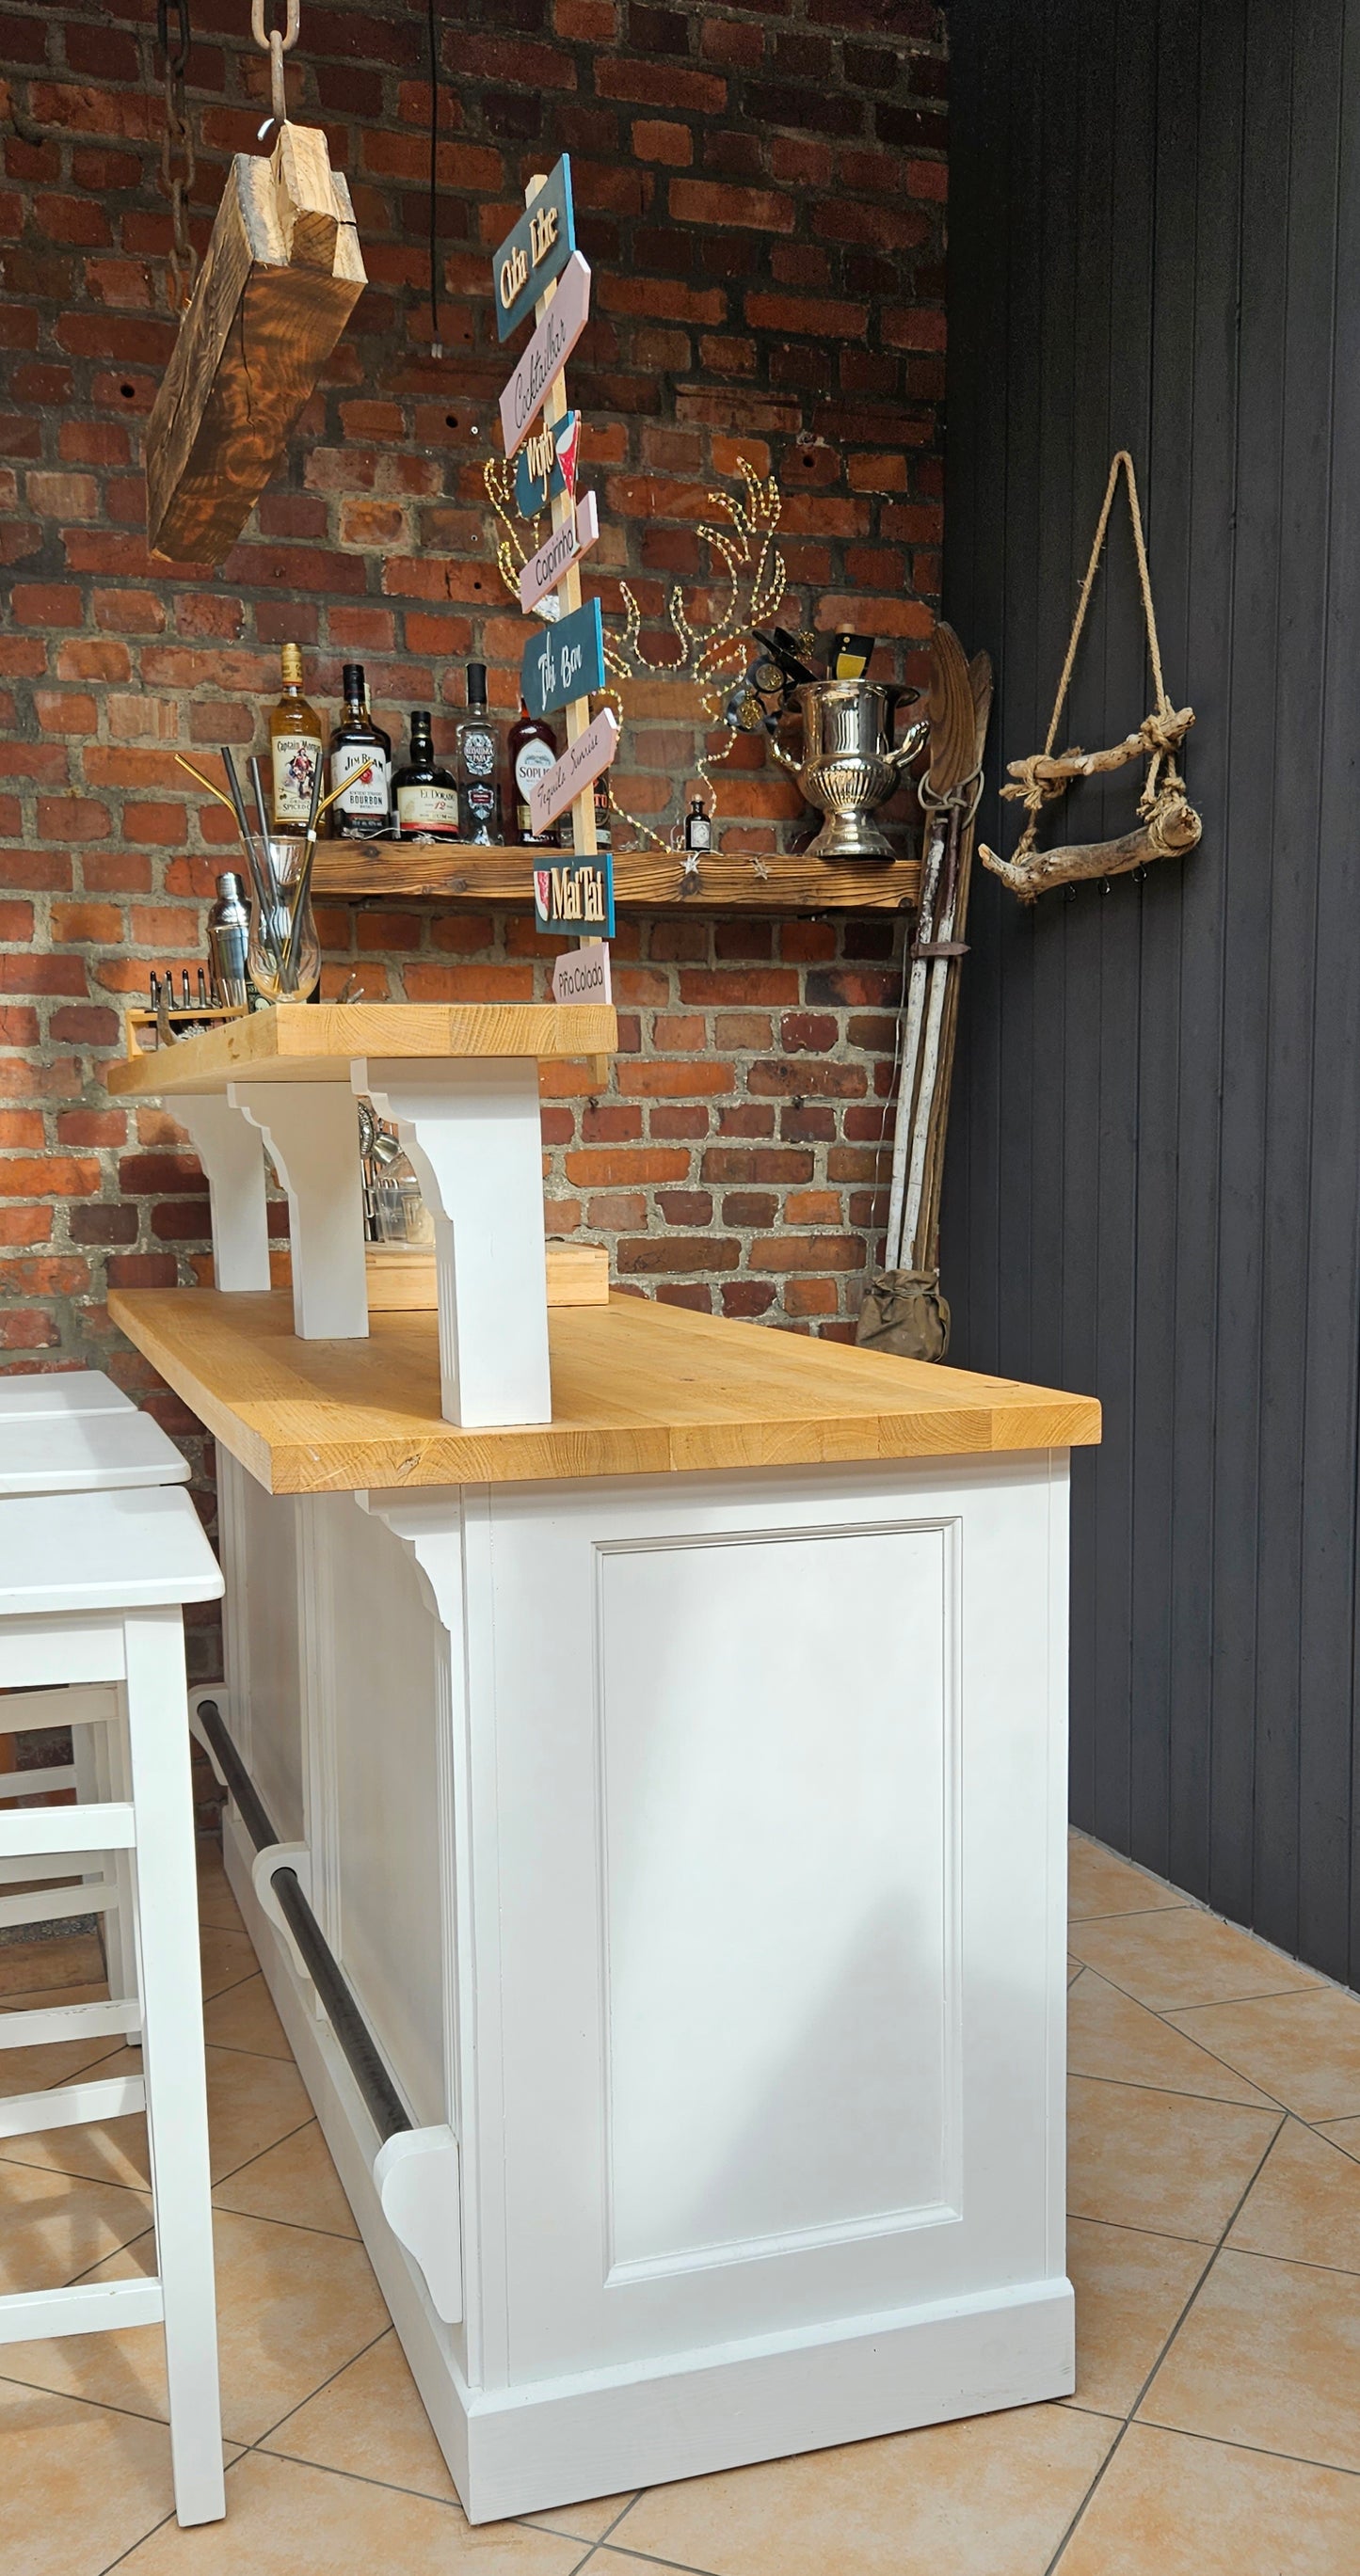 "James" - Solid wood bar, country house style